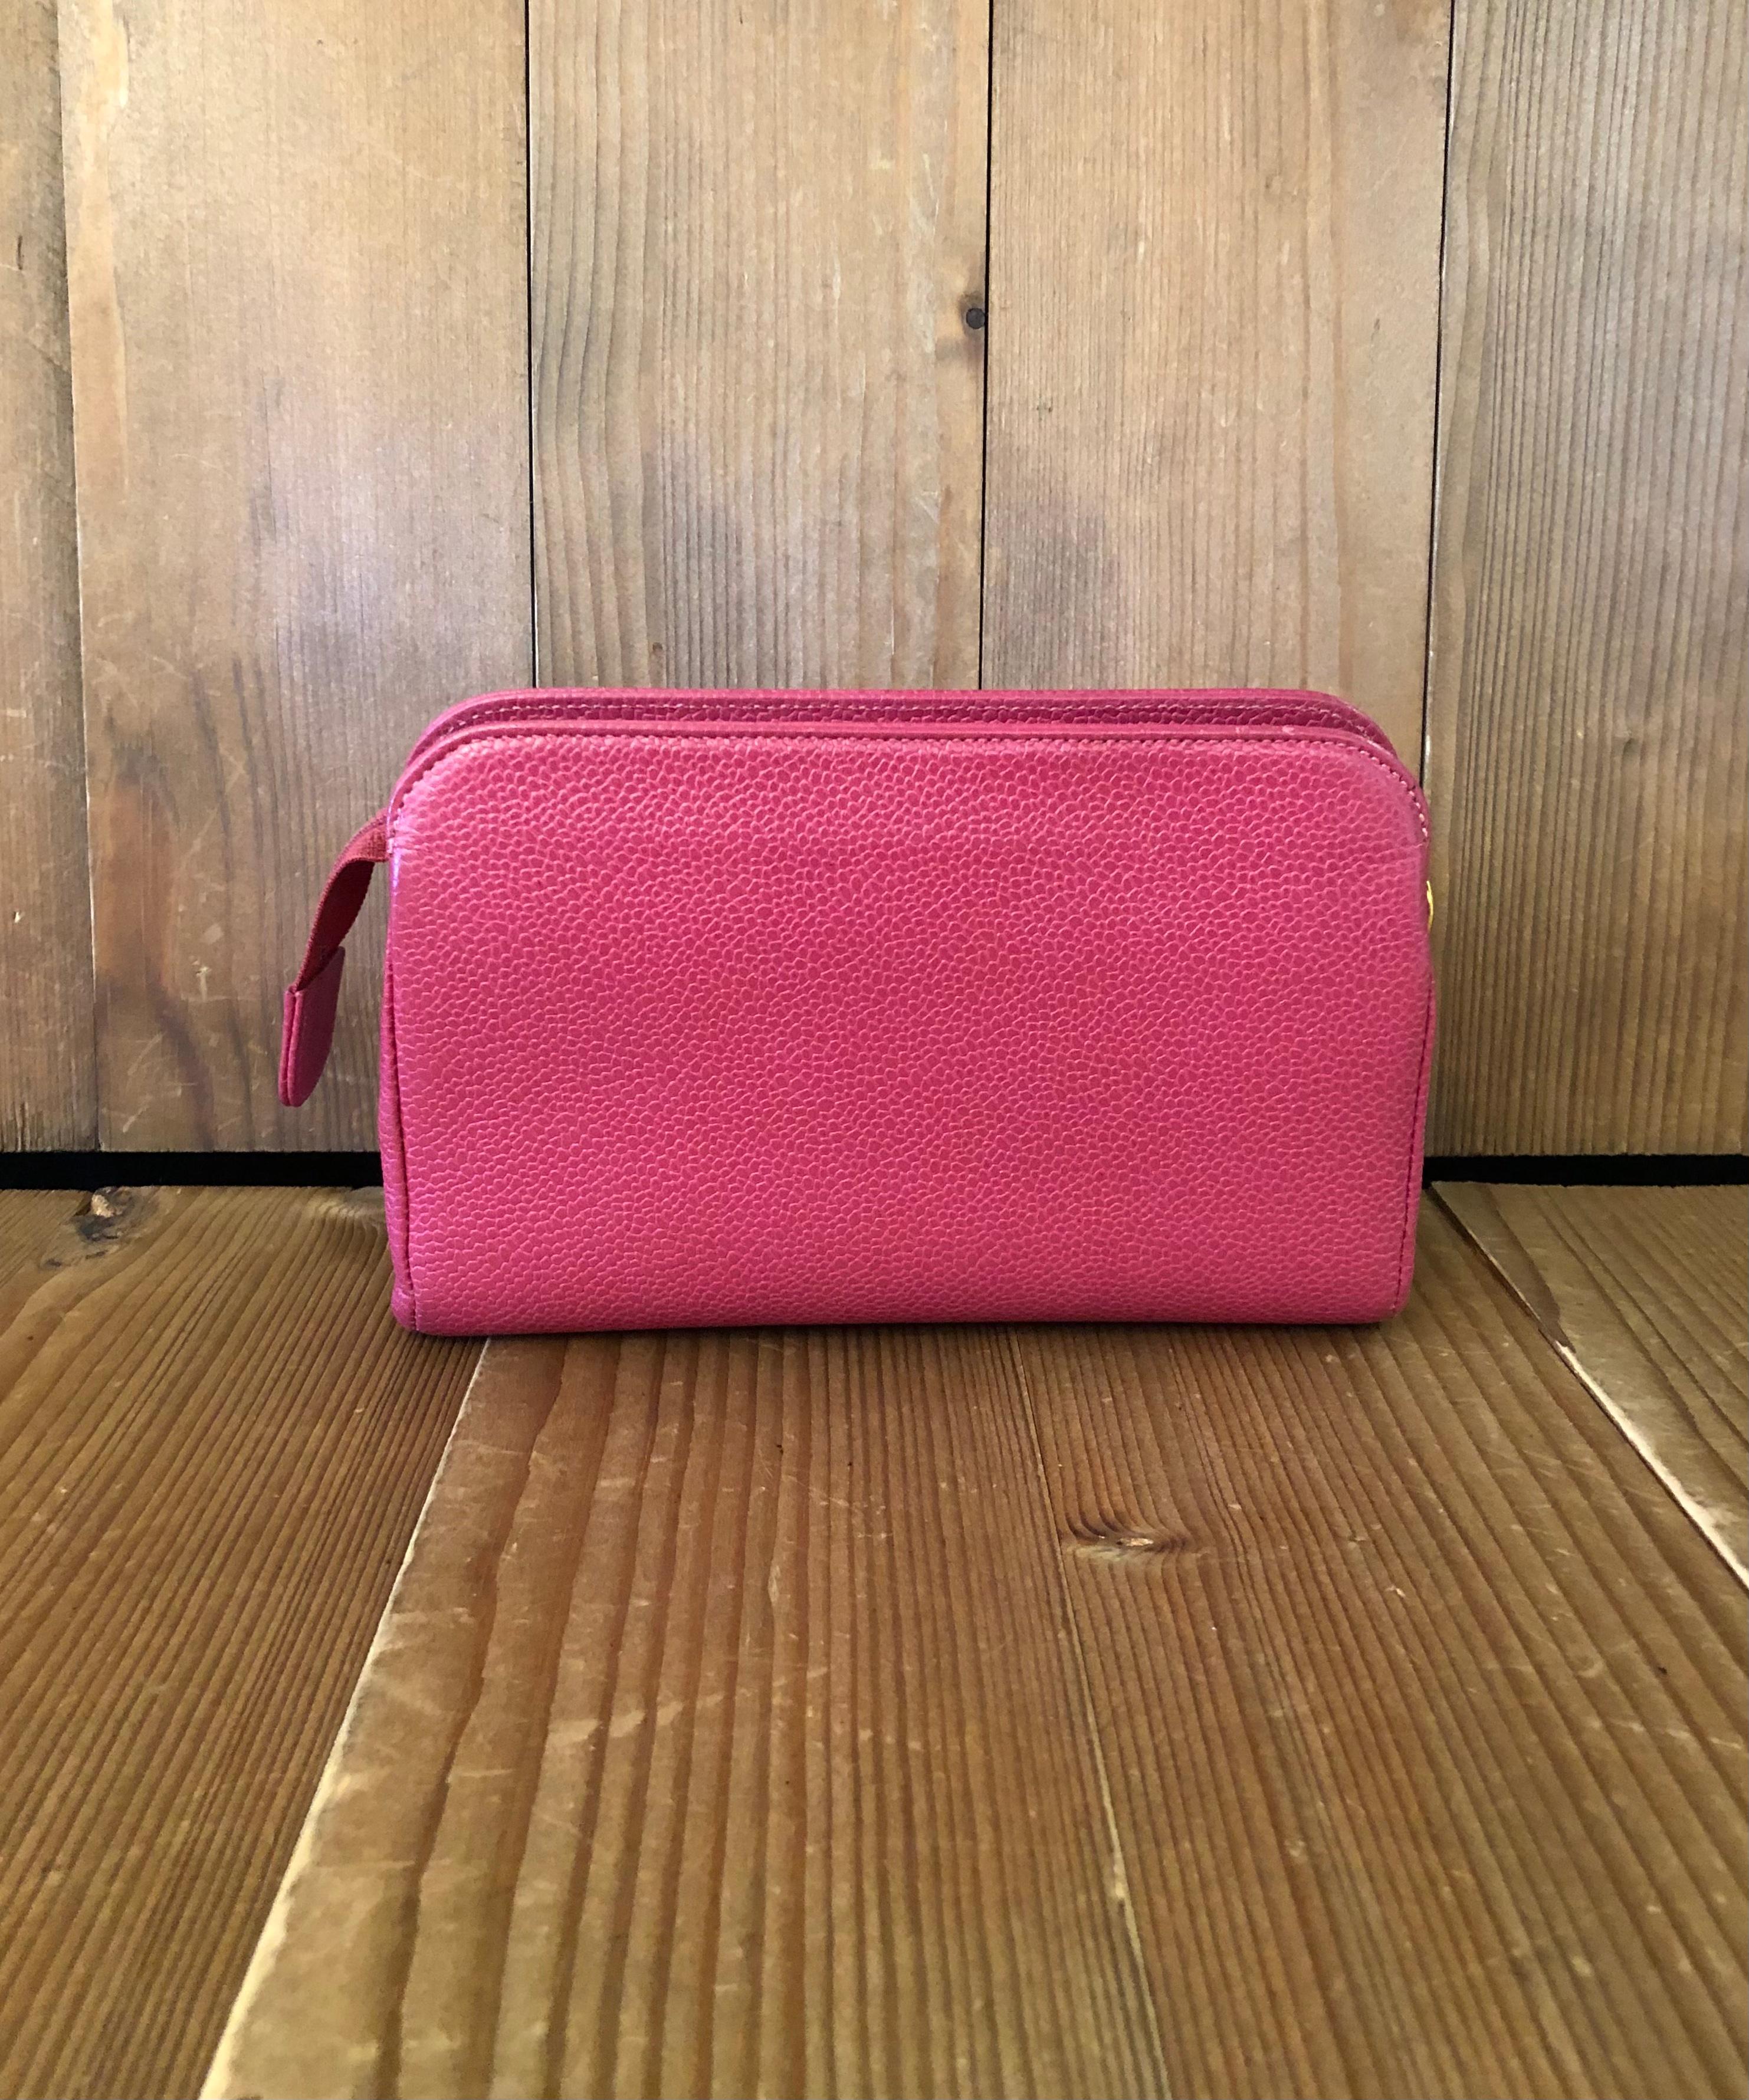 Vintage CHANEL Pink Caviar Leather Pouch Bag Clutch Bag (Altered) 1